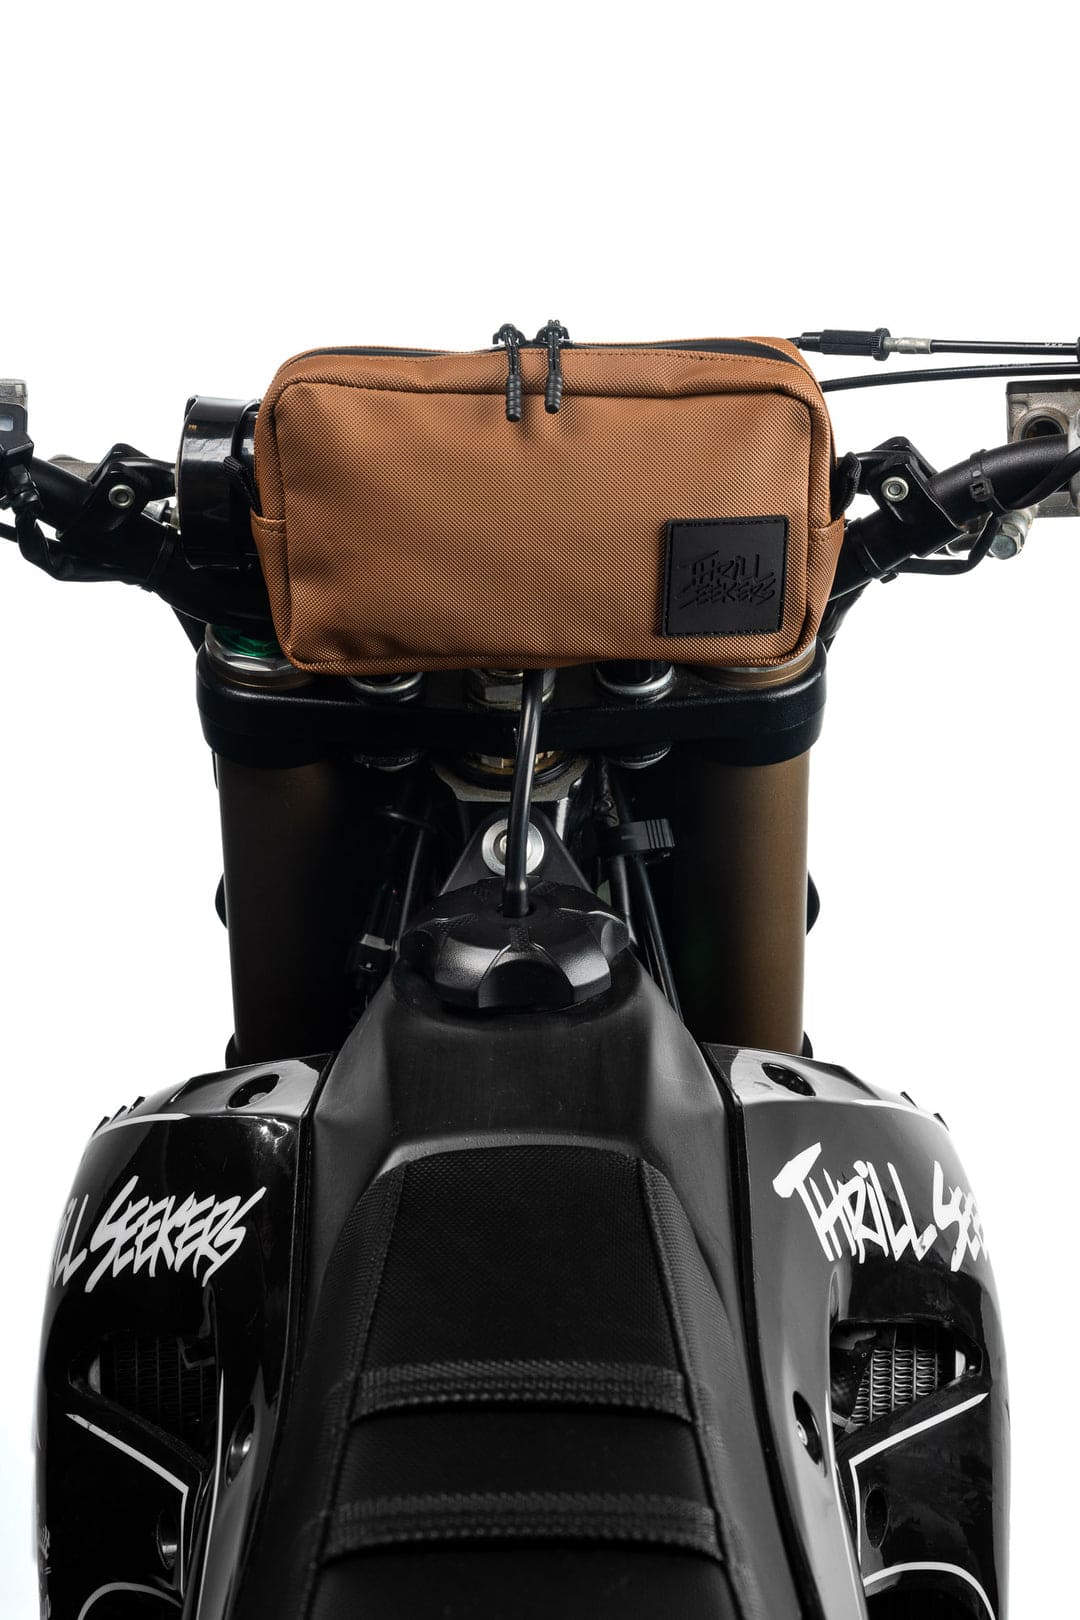 Giant Loop® Motorcycle Soft Luggage Kits for Dirt, Dual Sport, Enduro and  Adventure Touring - Giant Loop